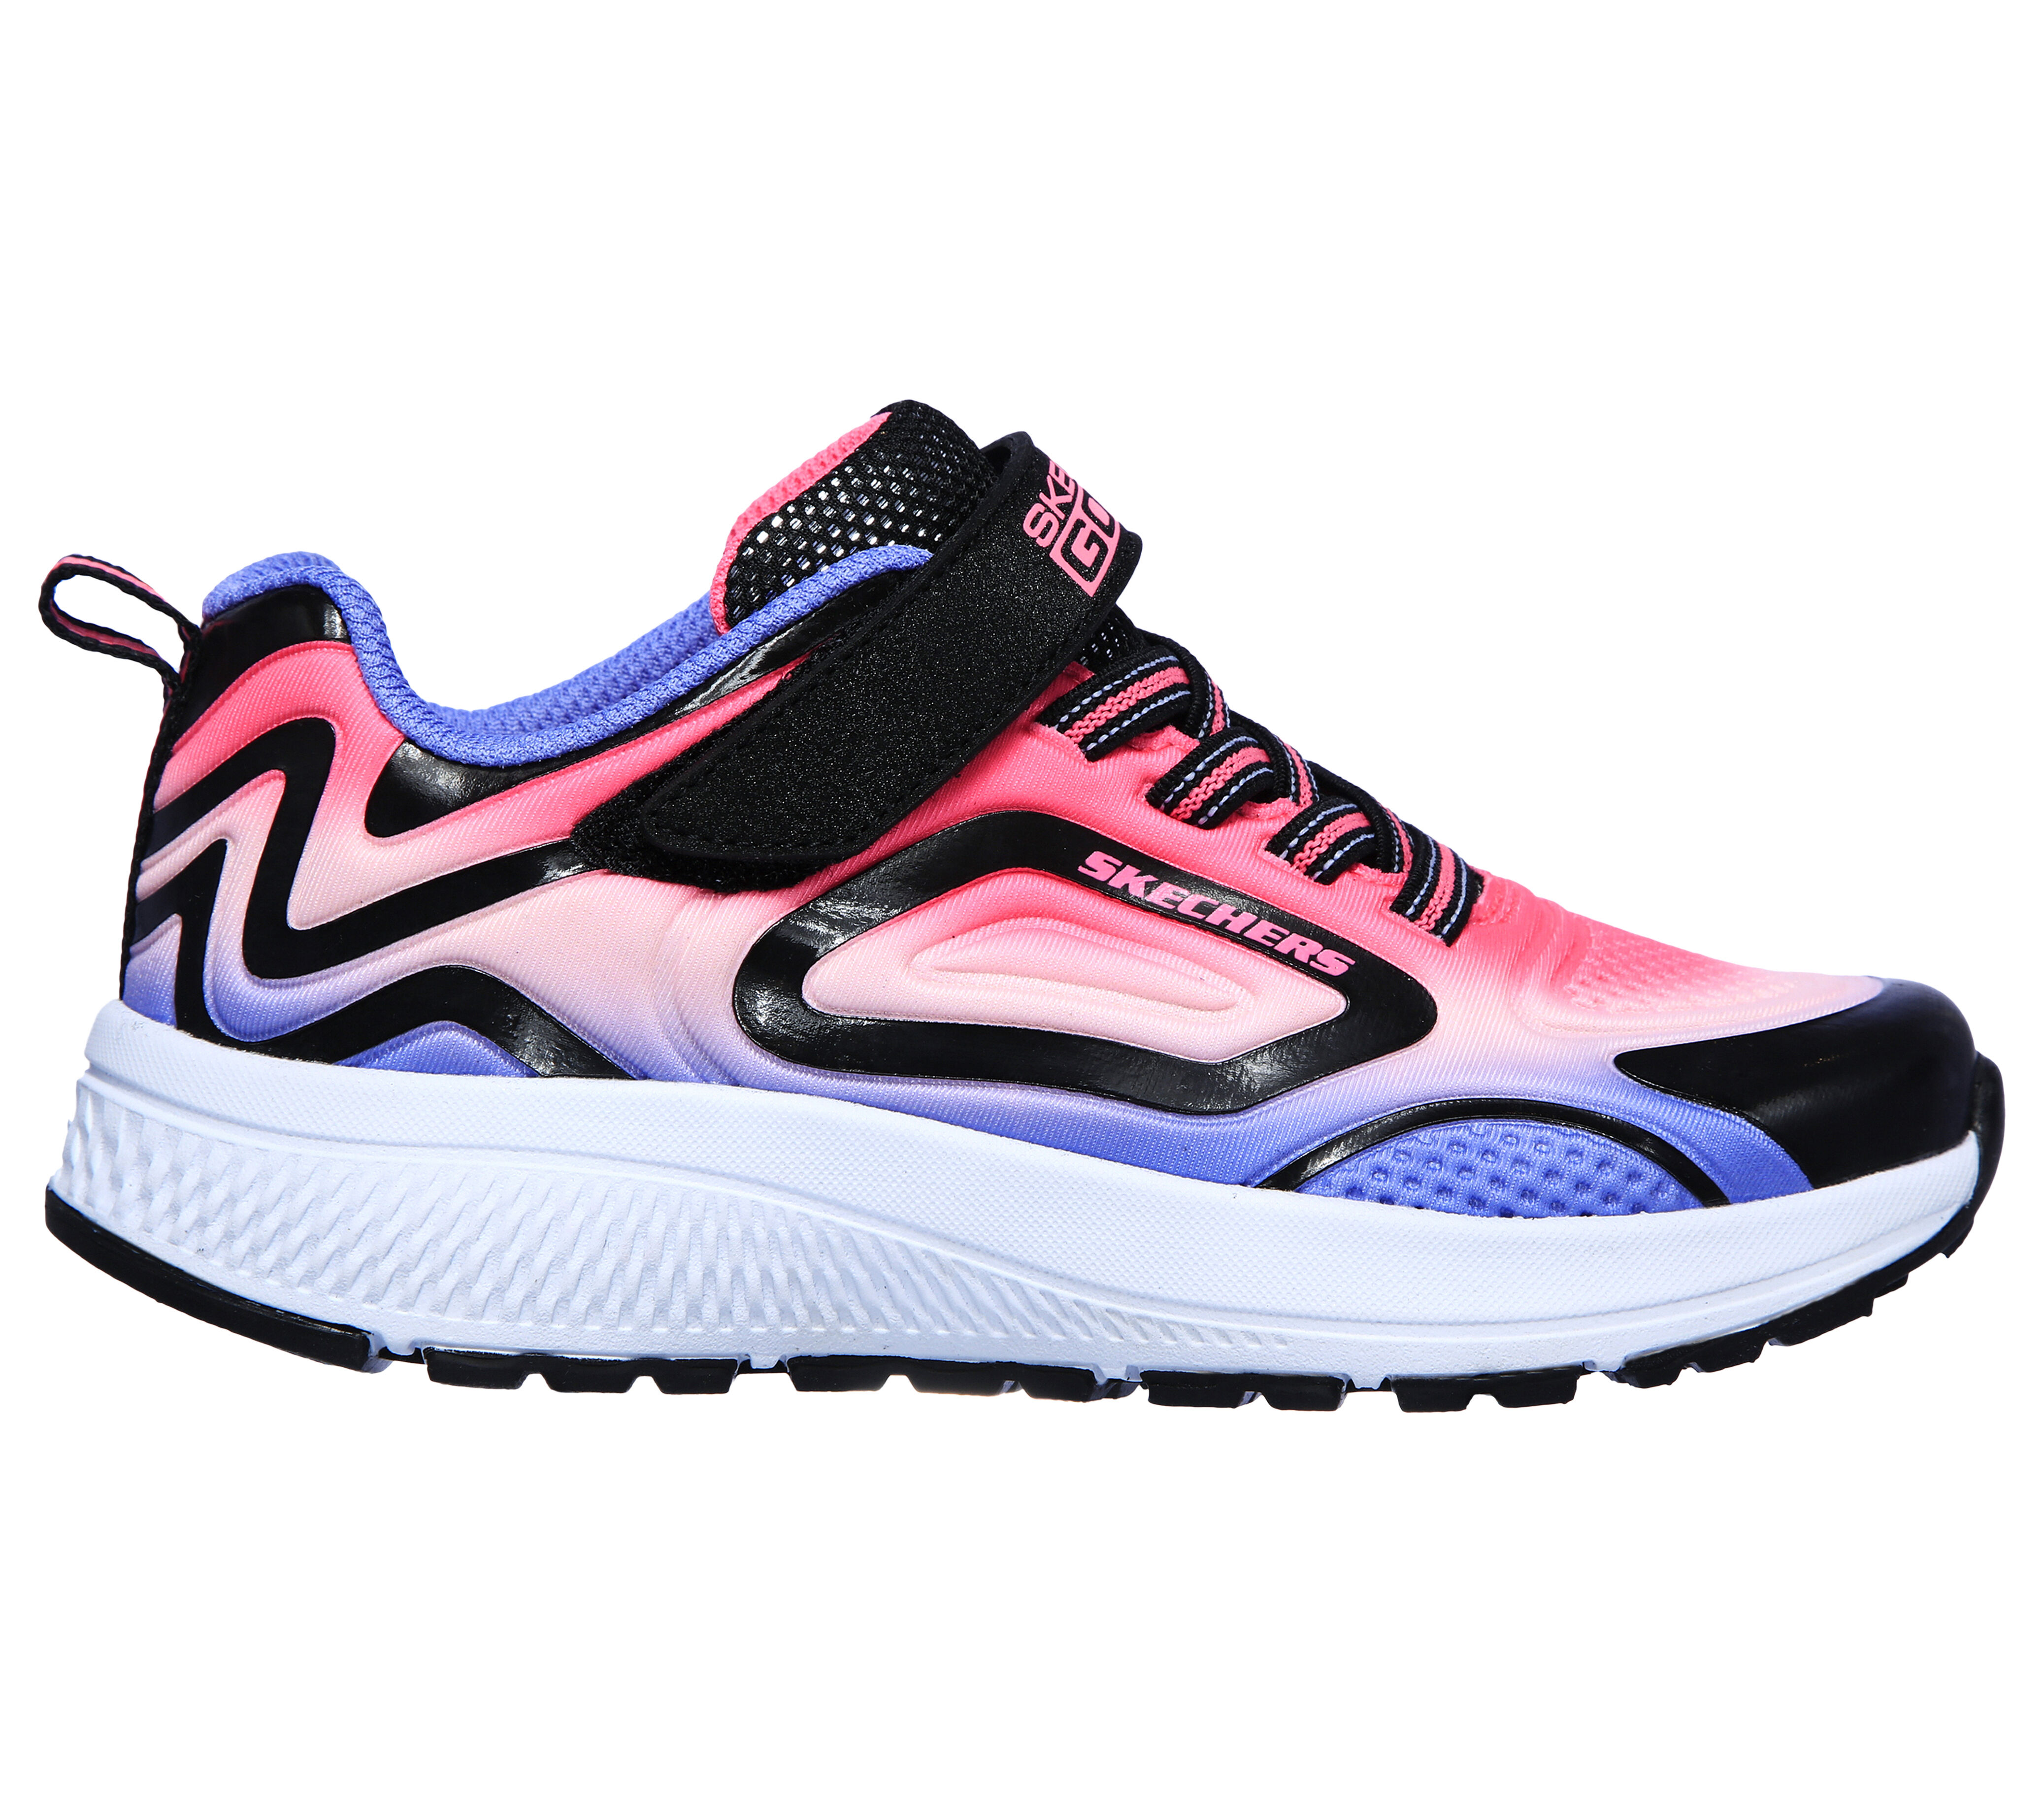 skechers fille taille 27